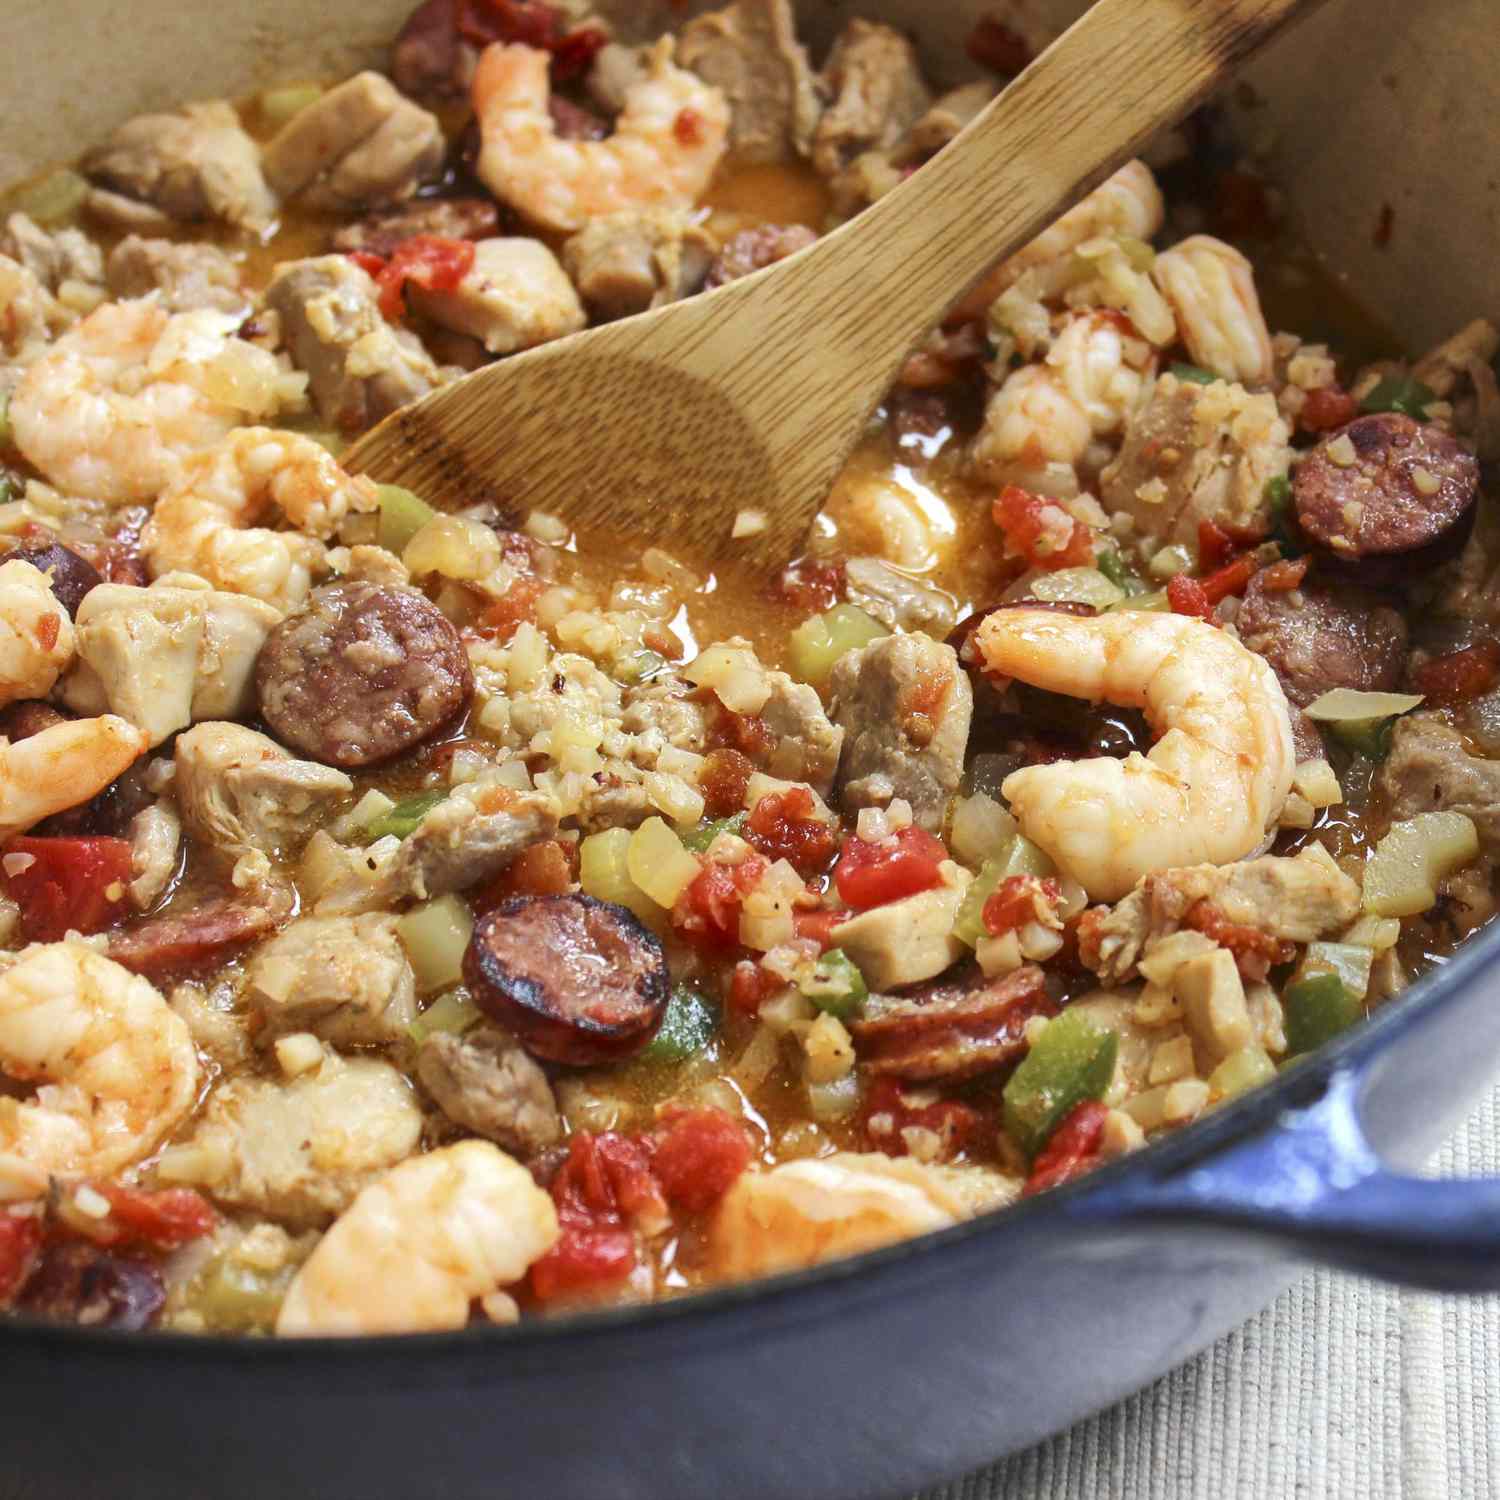 A close-up on dutch oven filled with Jambalaya